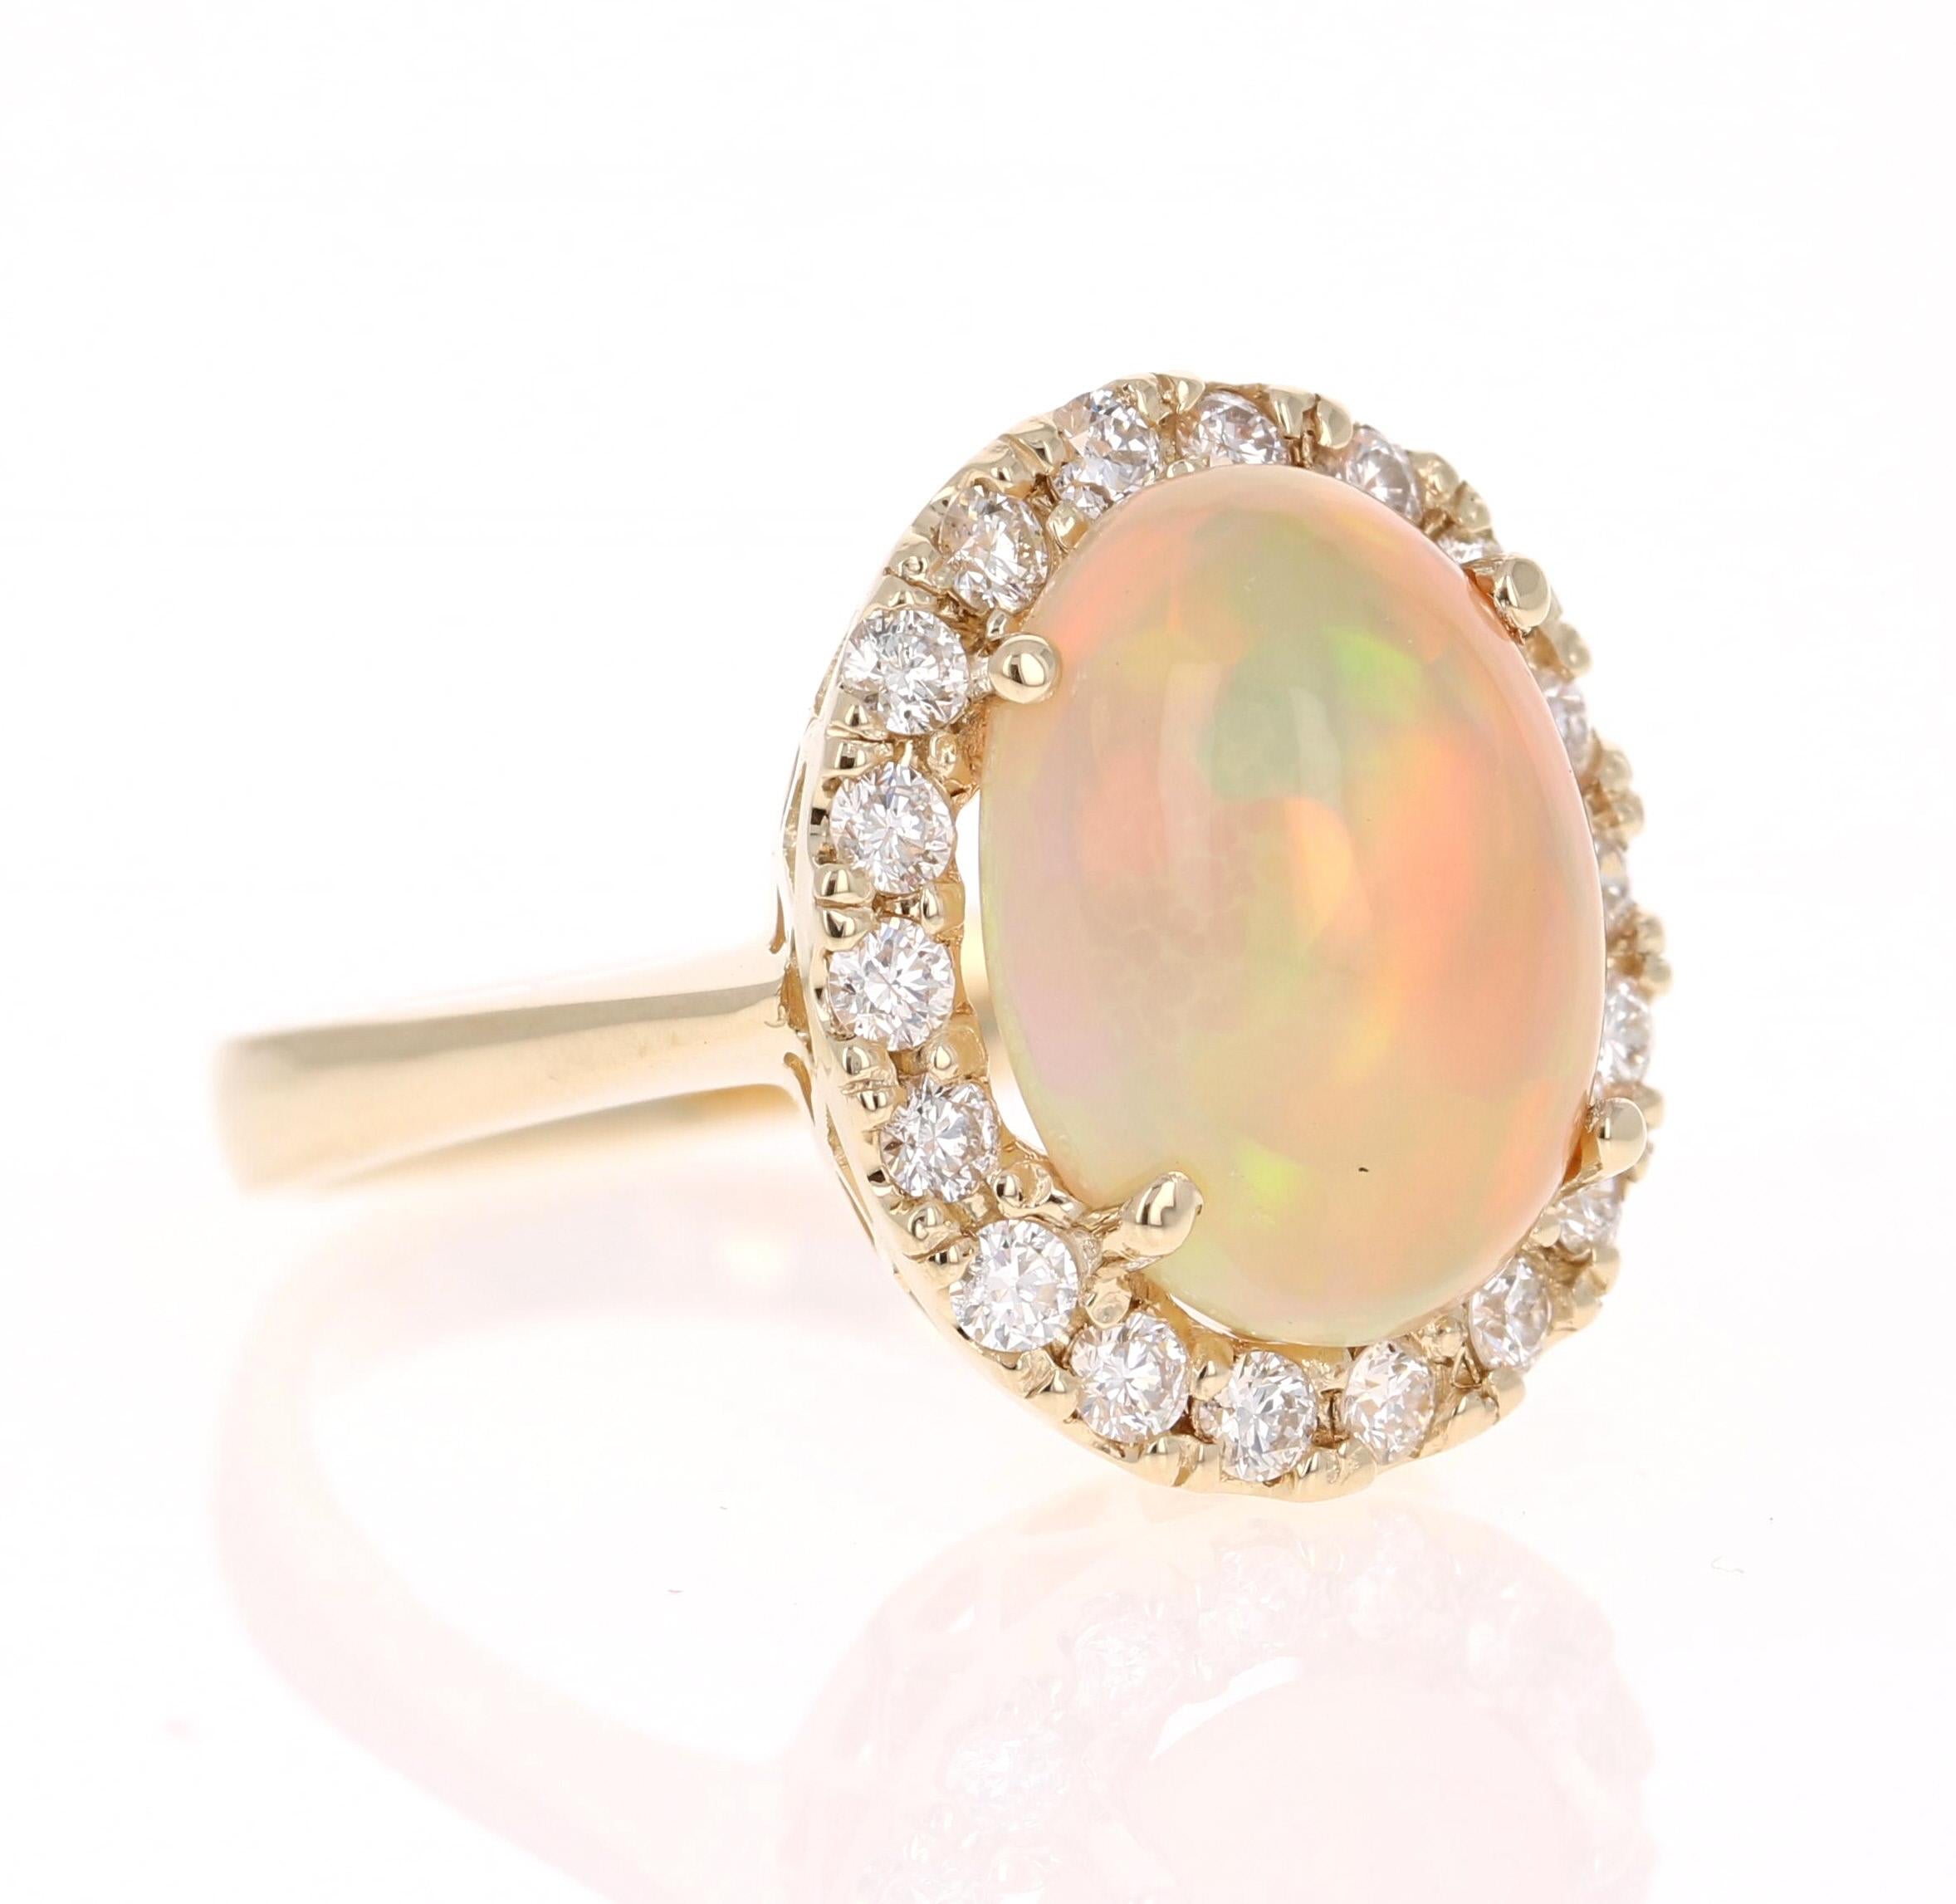 Simply beautiful Opal and Diamond 14 Karat Yellow Gold Ring. 

This ring has a lovely Oval Cut Ethiopian-Origin Opal that weighs 4.35 Carats and has flashes of orange, green, red and yellow shining bright. There are 18 Round Cut Diamonds that weigh